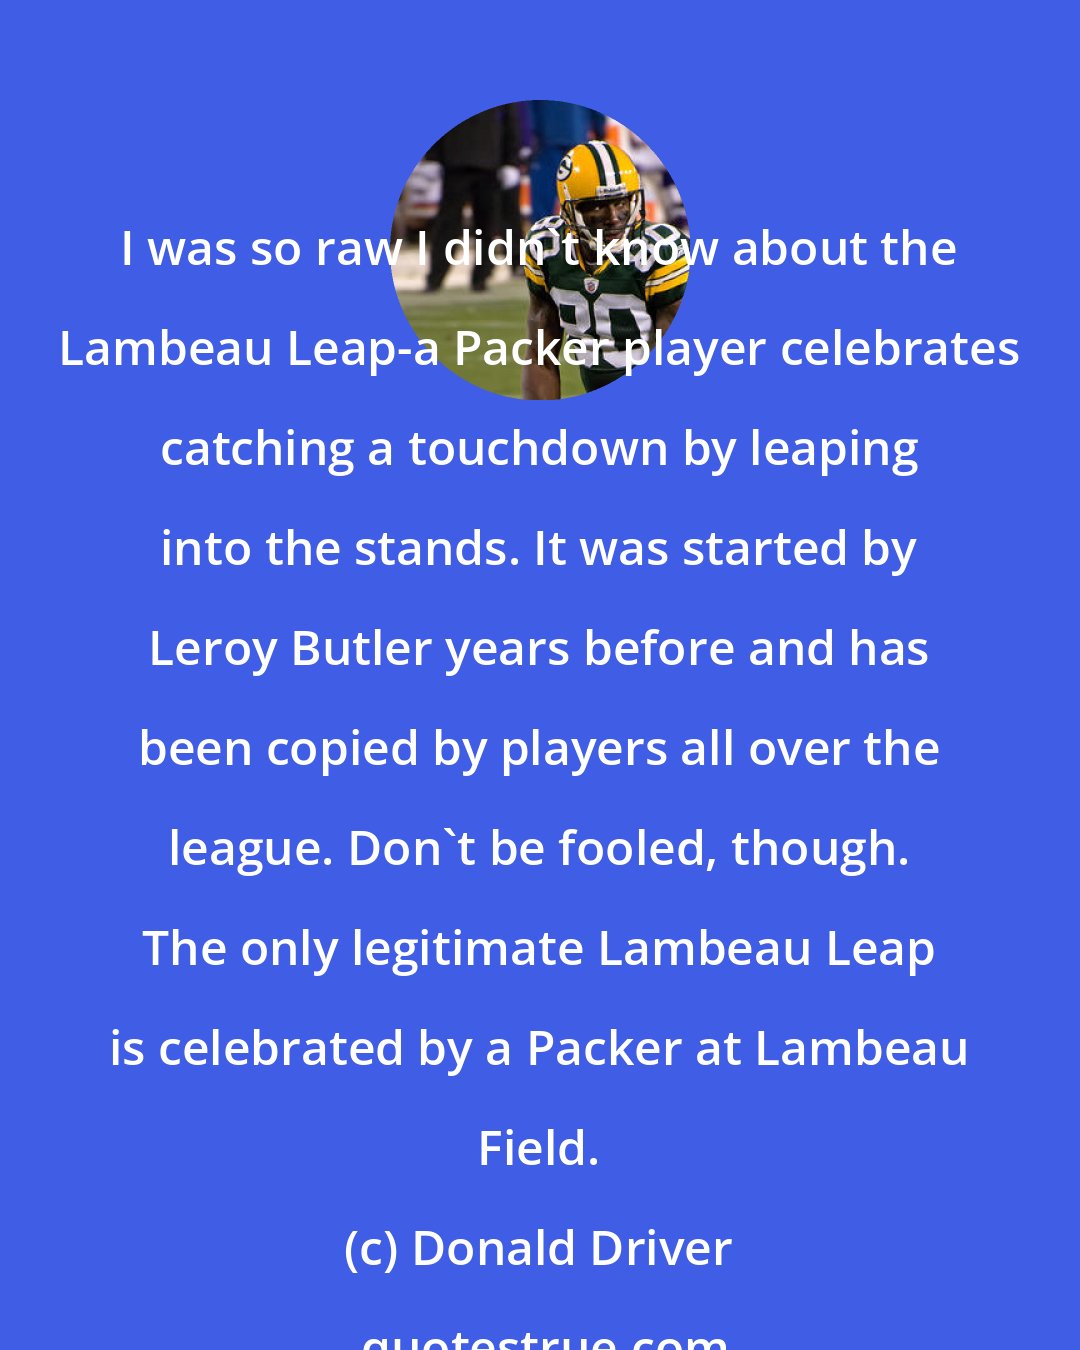 Donald Driver: I was so raw I didn't know about the Lambeau Leap-a Packer player celebrates catching a touchdown by leaping into the stands. It was started by Leroy Butler years before and has been copied by players all over the league. Don't be fooled, though. The only legitimate Lambeau Leap is celebrated by a Packer at Lambeau Field.